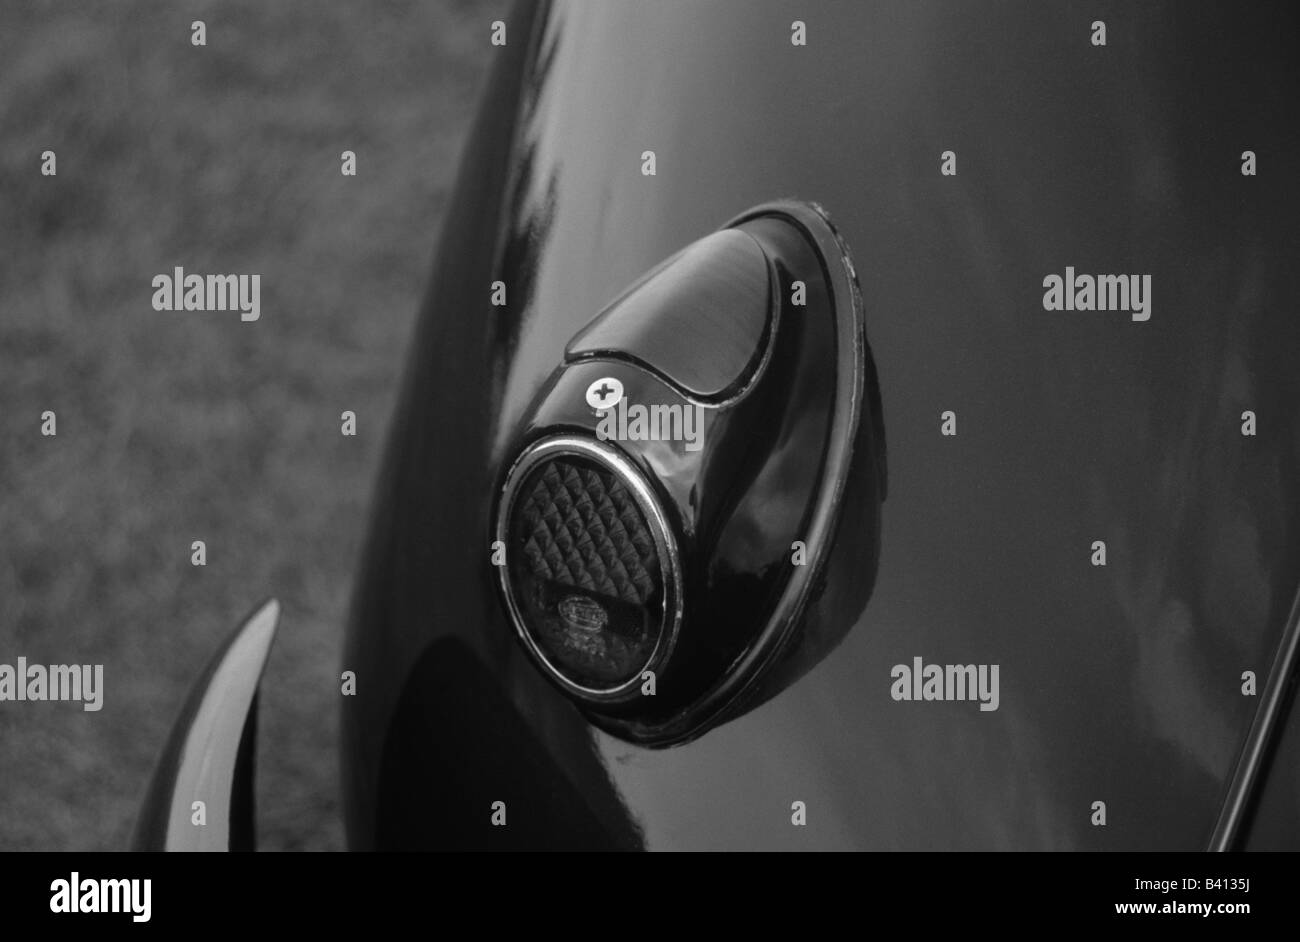 Volkswagen Beetle of 1955. car auto classic tail light Stock Photo